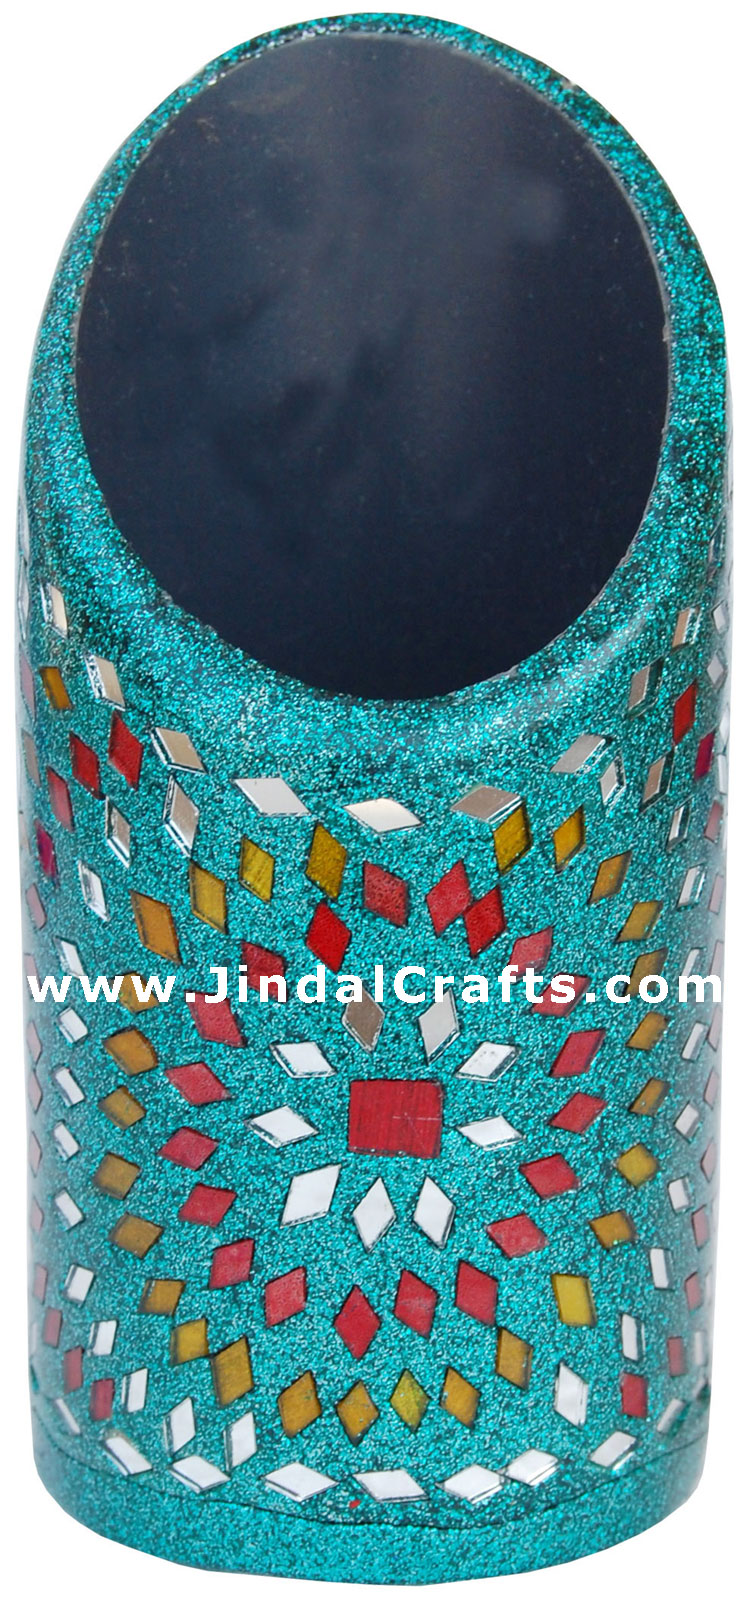 Handmade Decorative Lac Pen Stand Holder from Indian Lac Mirror Arts Handicrafts